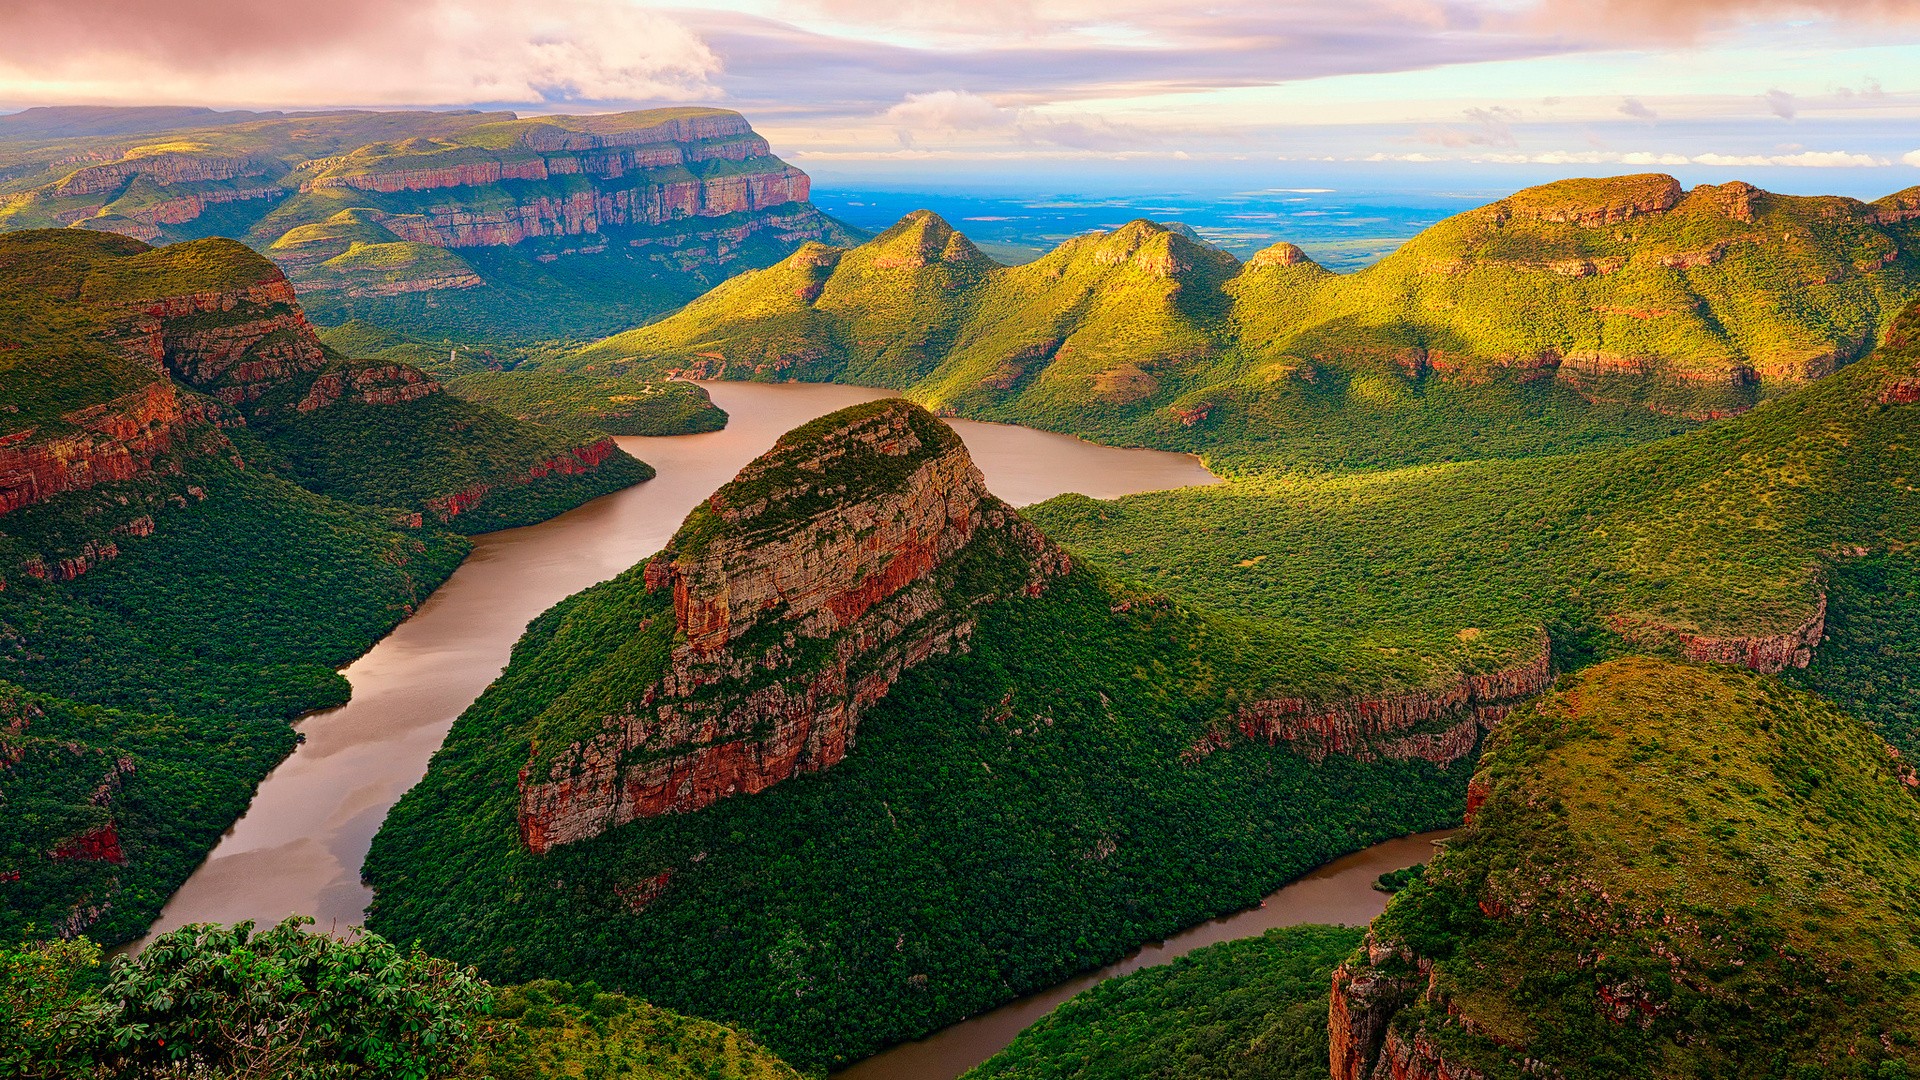 General 1920x1080 nature landscape mountains trees clouds aerial view forest South Africa canyon river rocks valley Blyde River Canyon